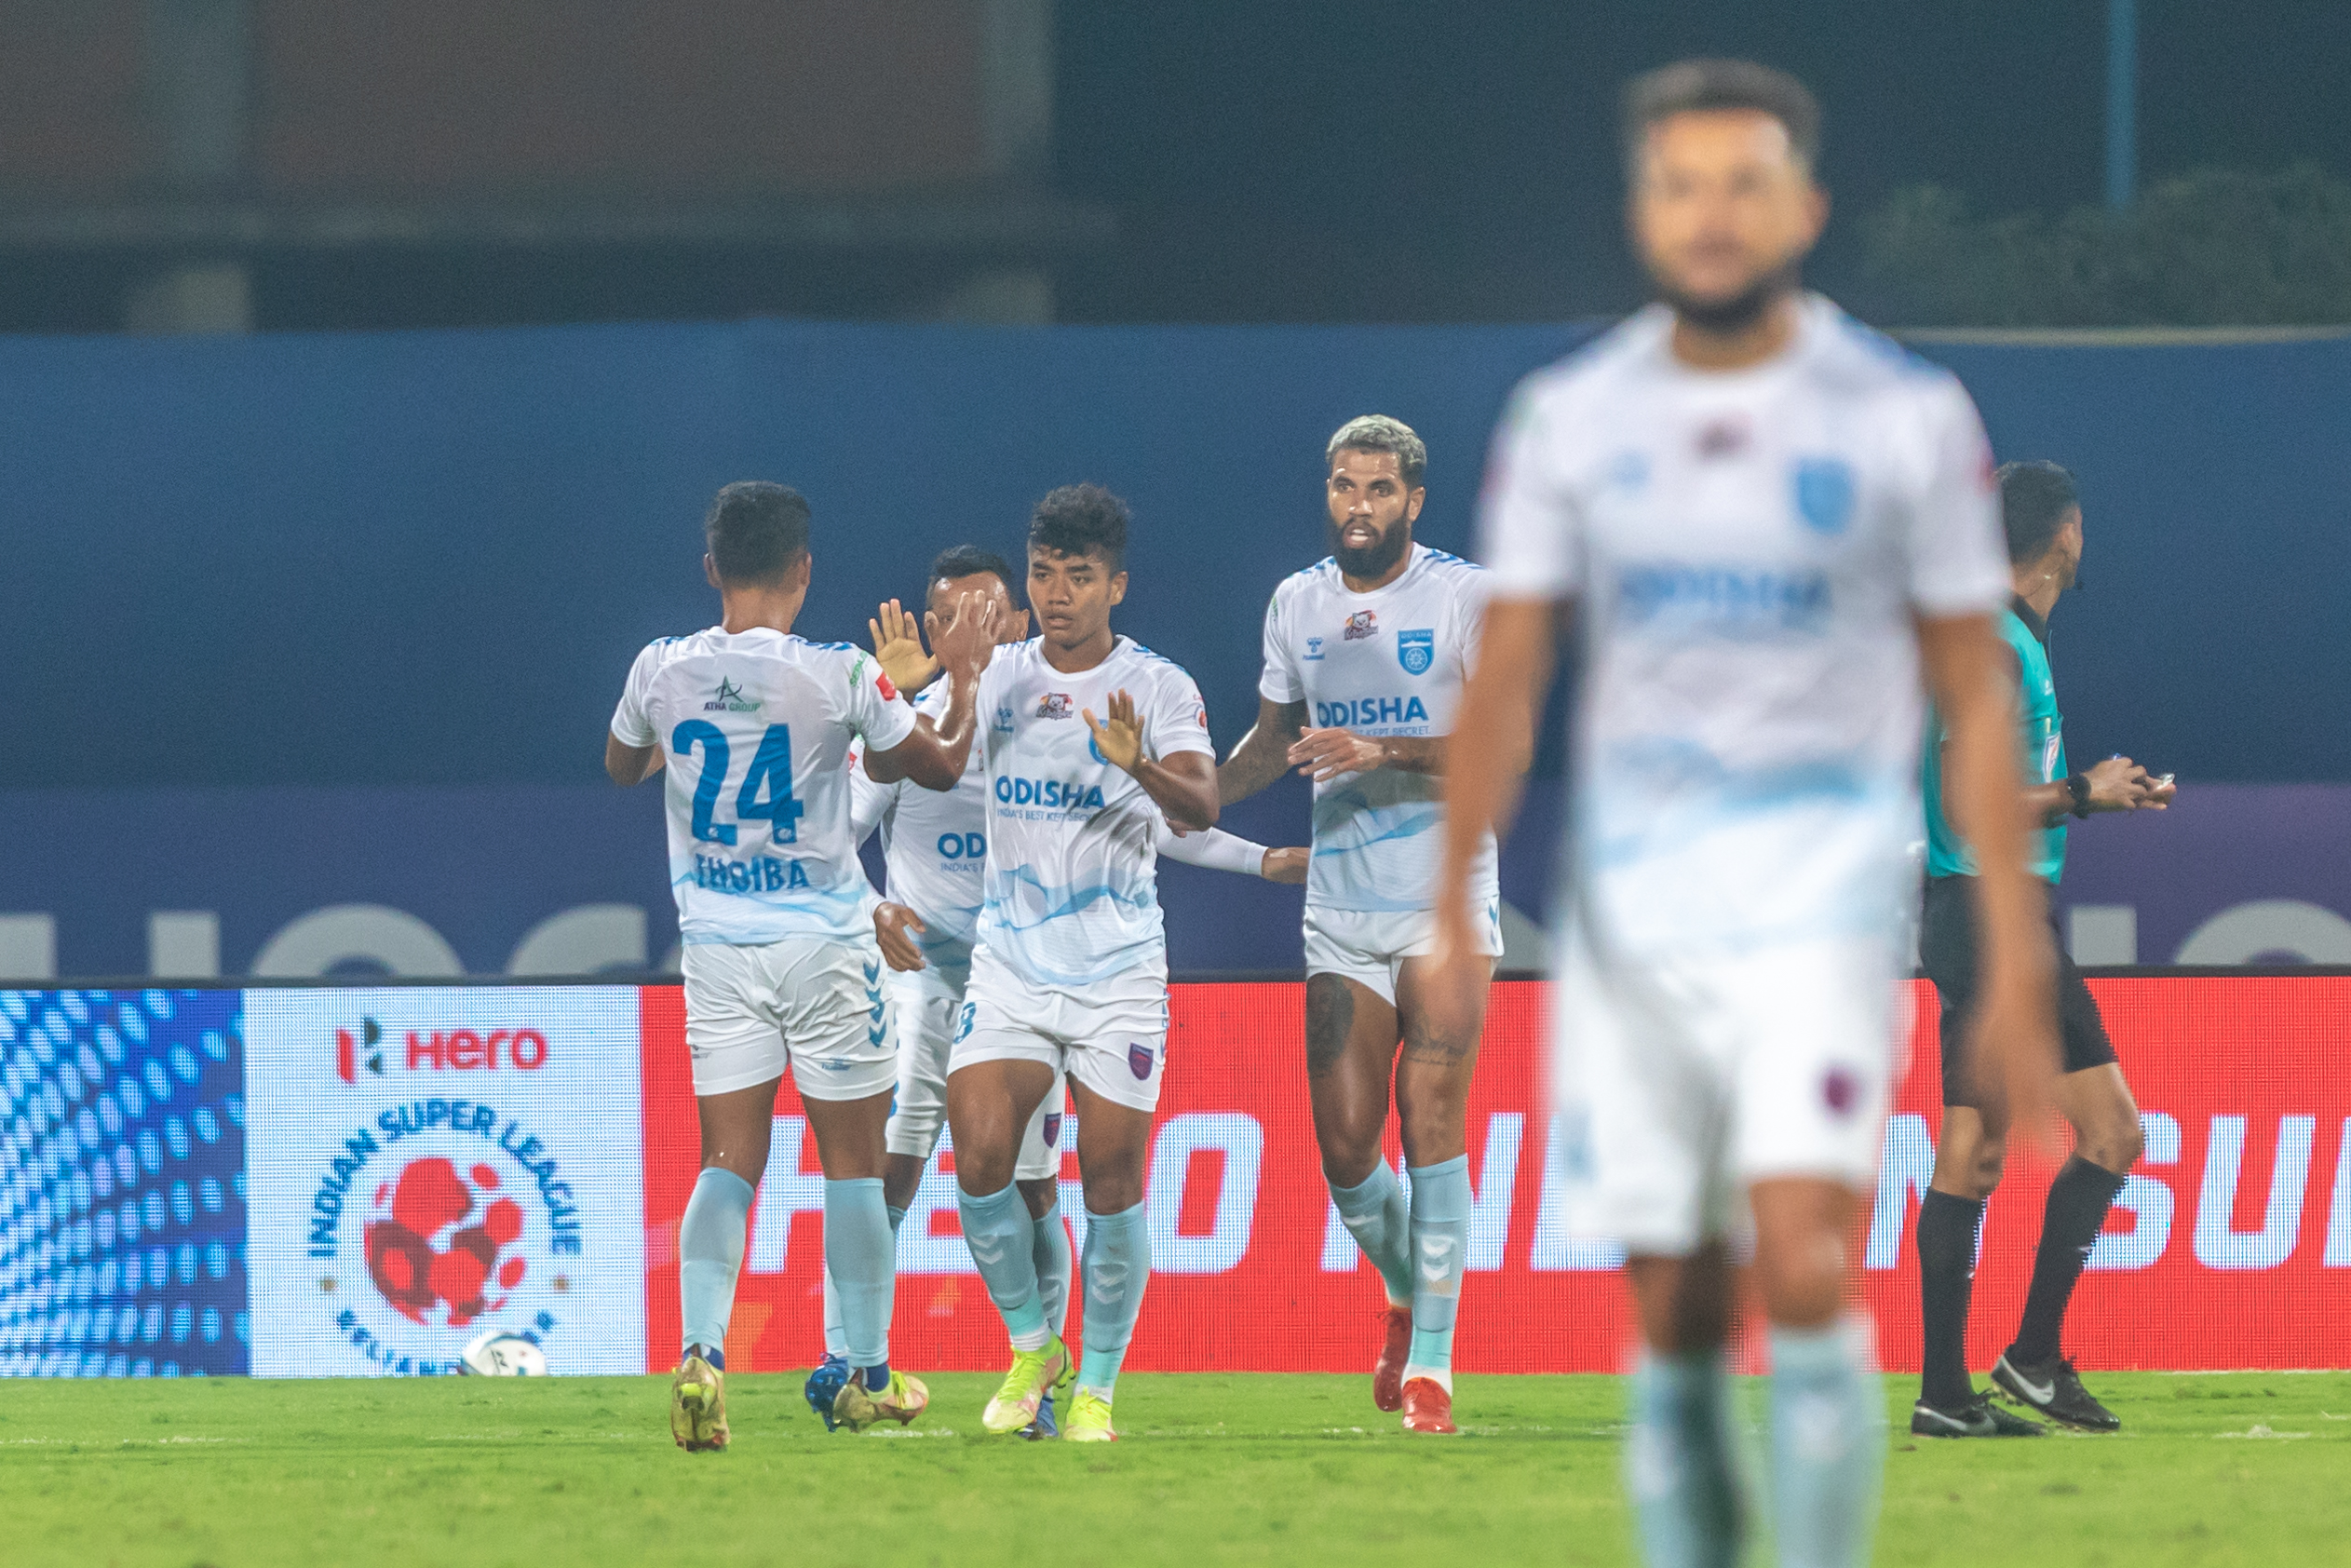 ISL Season 8: We will keep improving and come back stronger, assures Odisha FC's Kino Garcia after 5-1 defeat against Jamshedpur FC